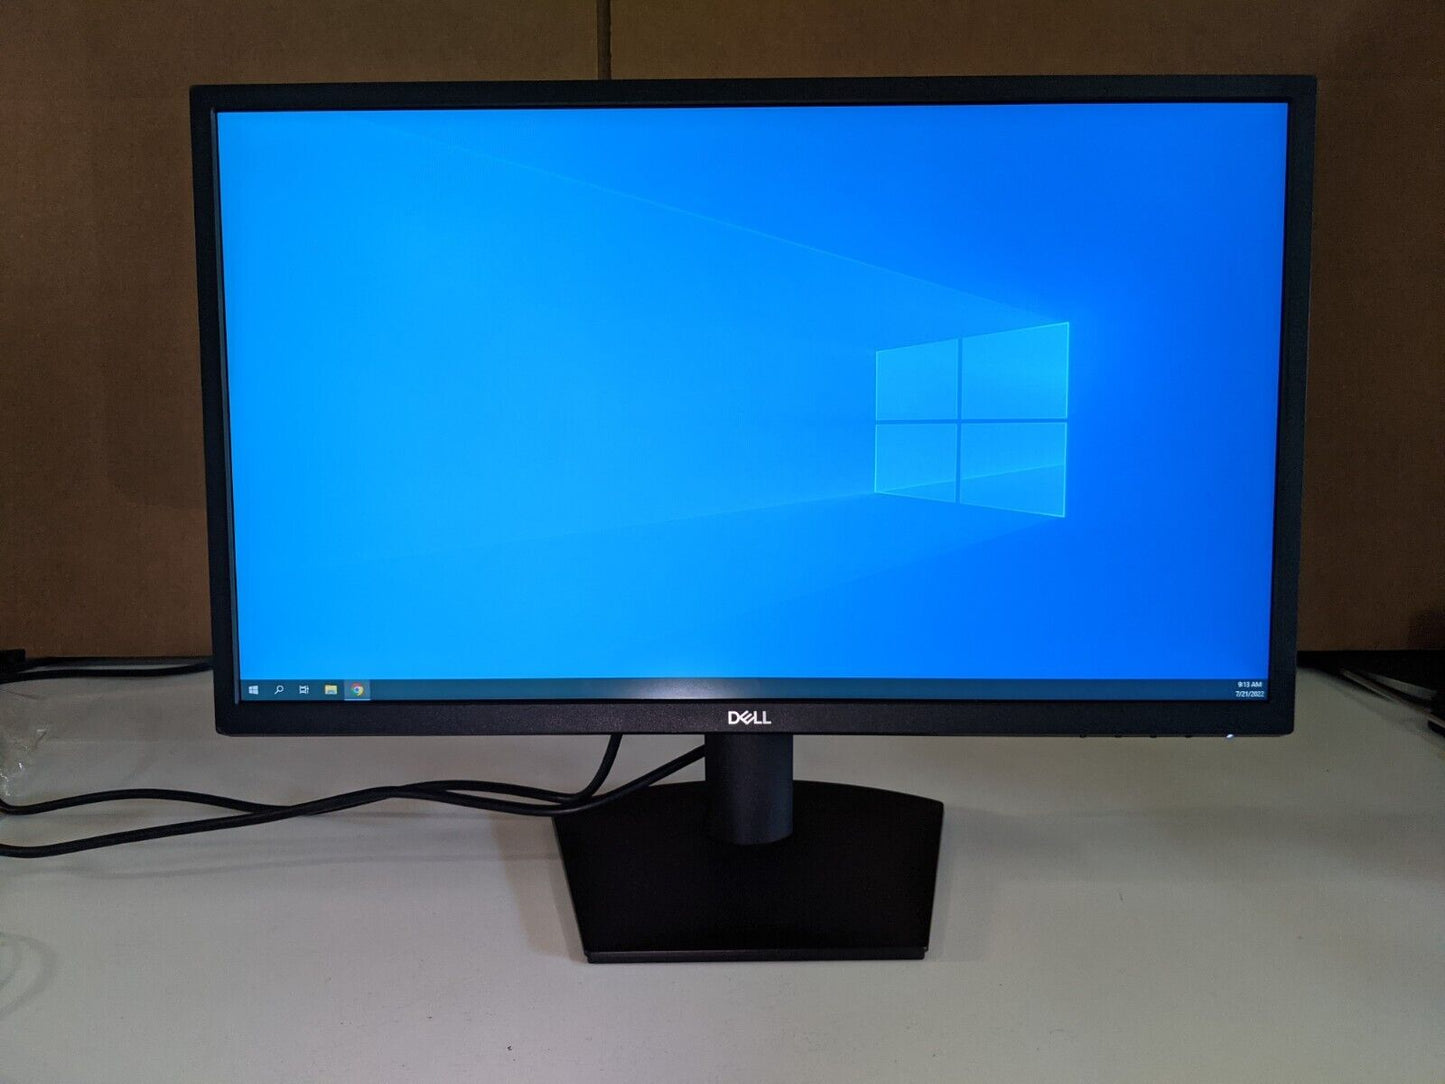 DELL SE2422H 24' Inch Widescreen LED FULL HD IPS Monitor- no cables